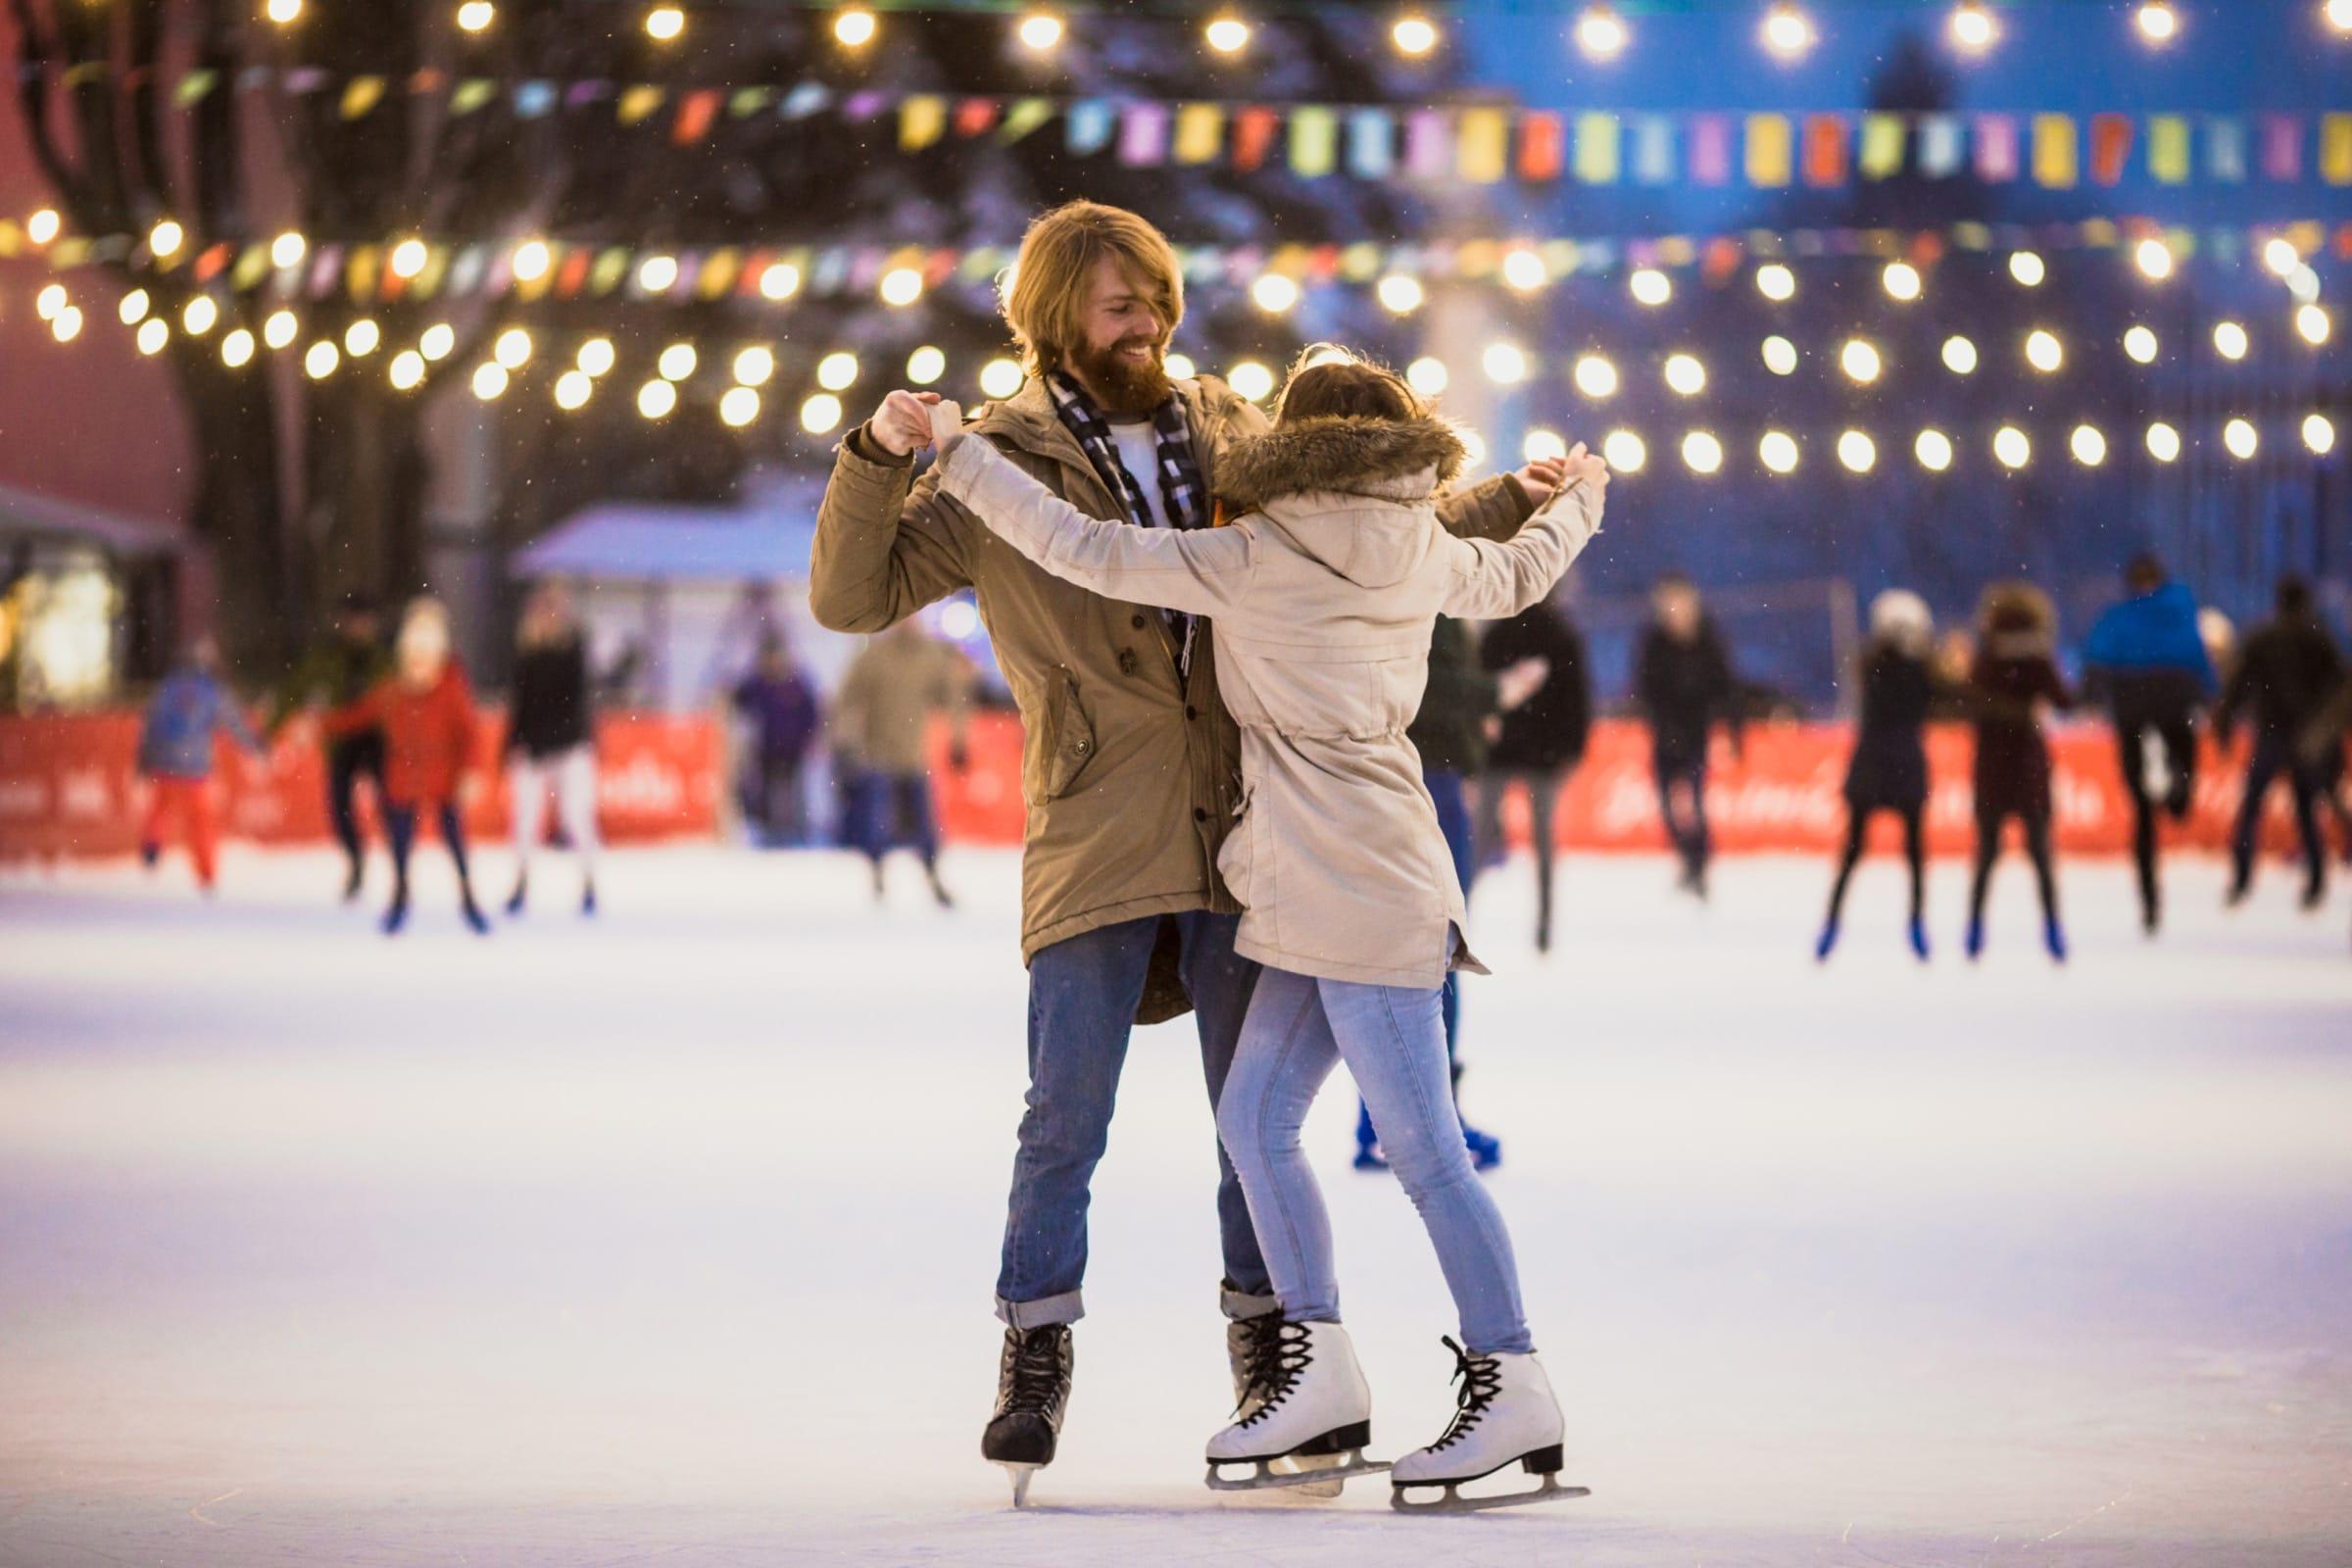 Get Your Skates On: Our Guide To Ice Skating Dates